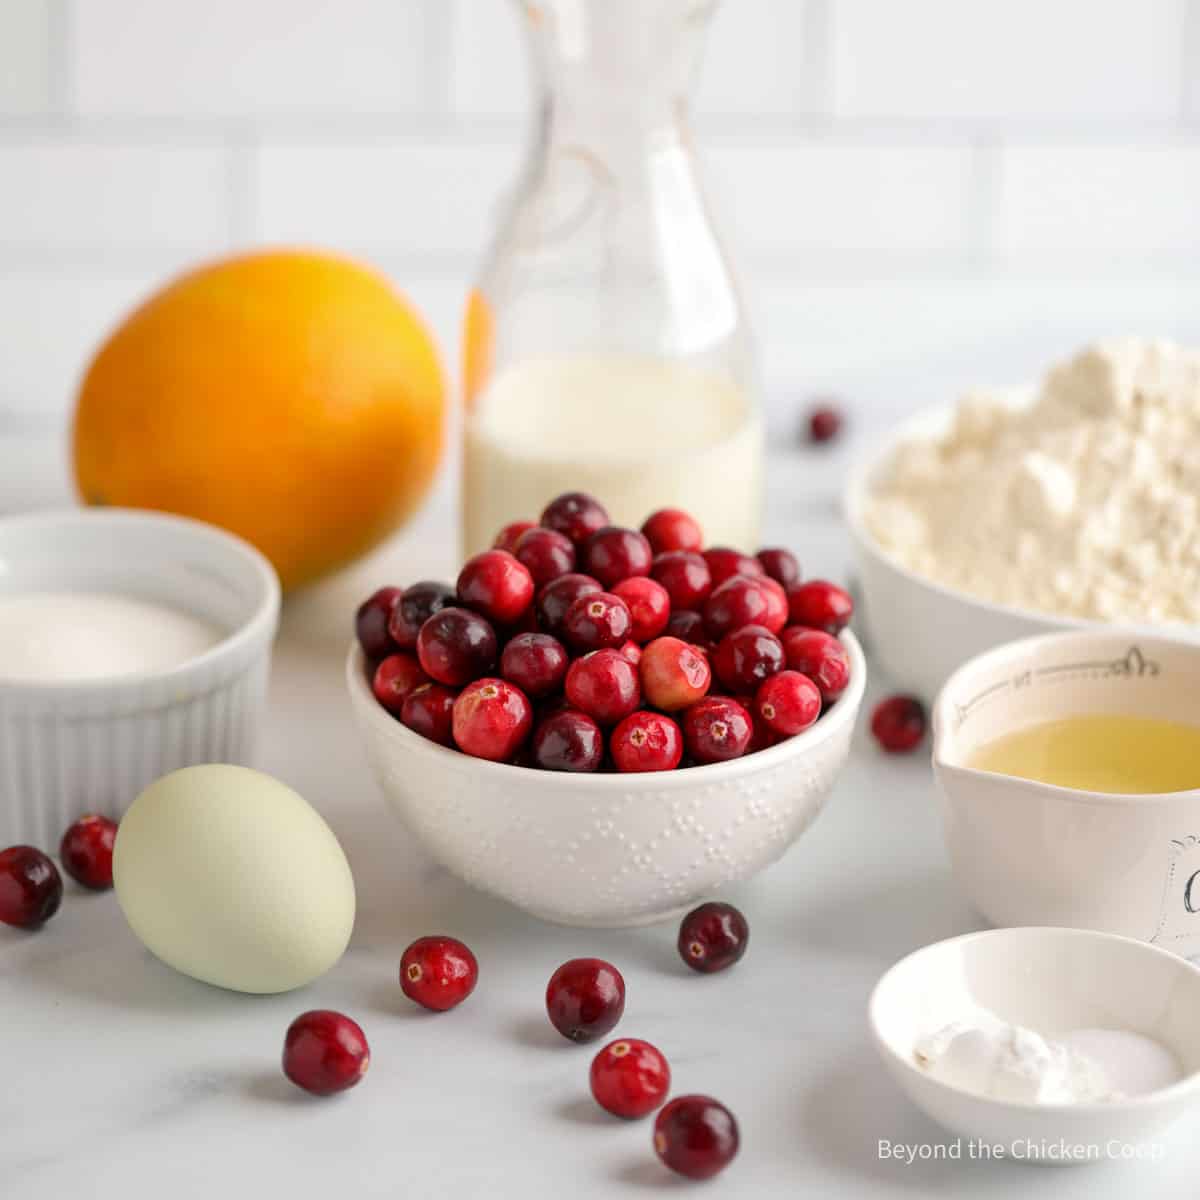 Ingredients for making cranberry muffins.